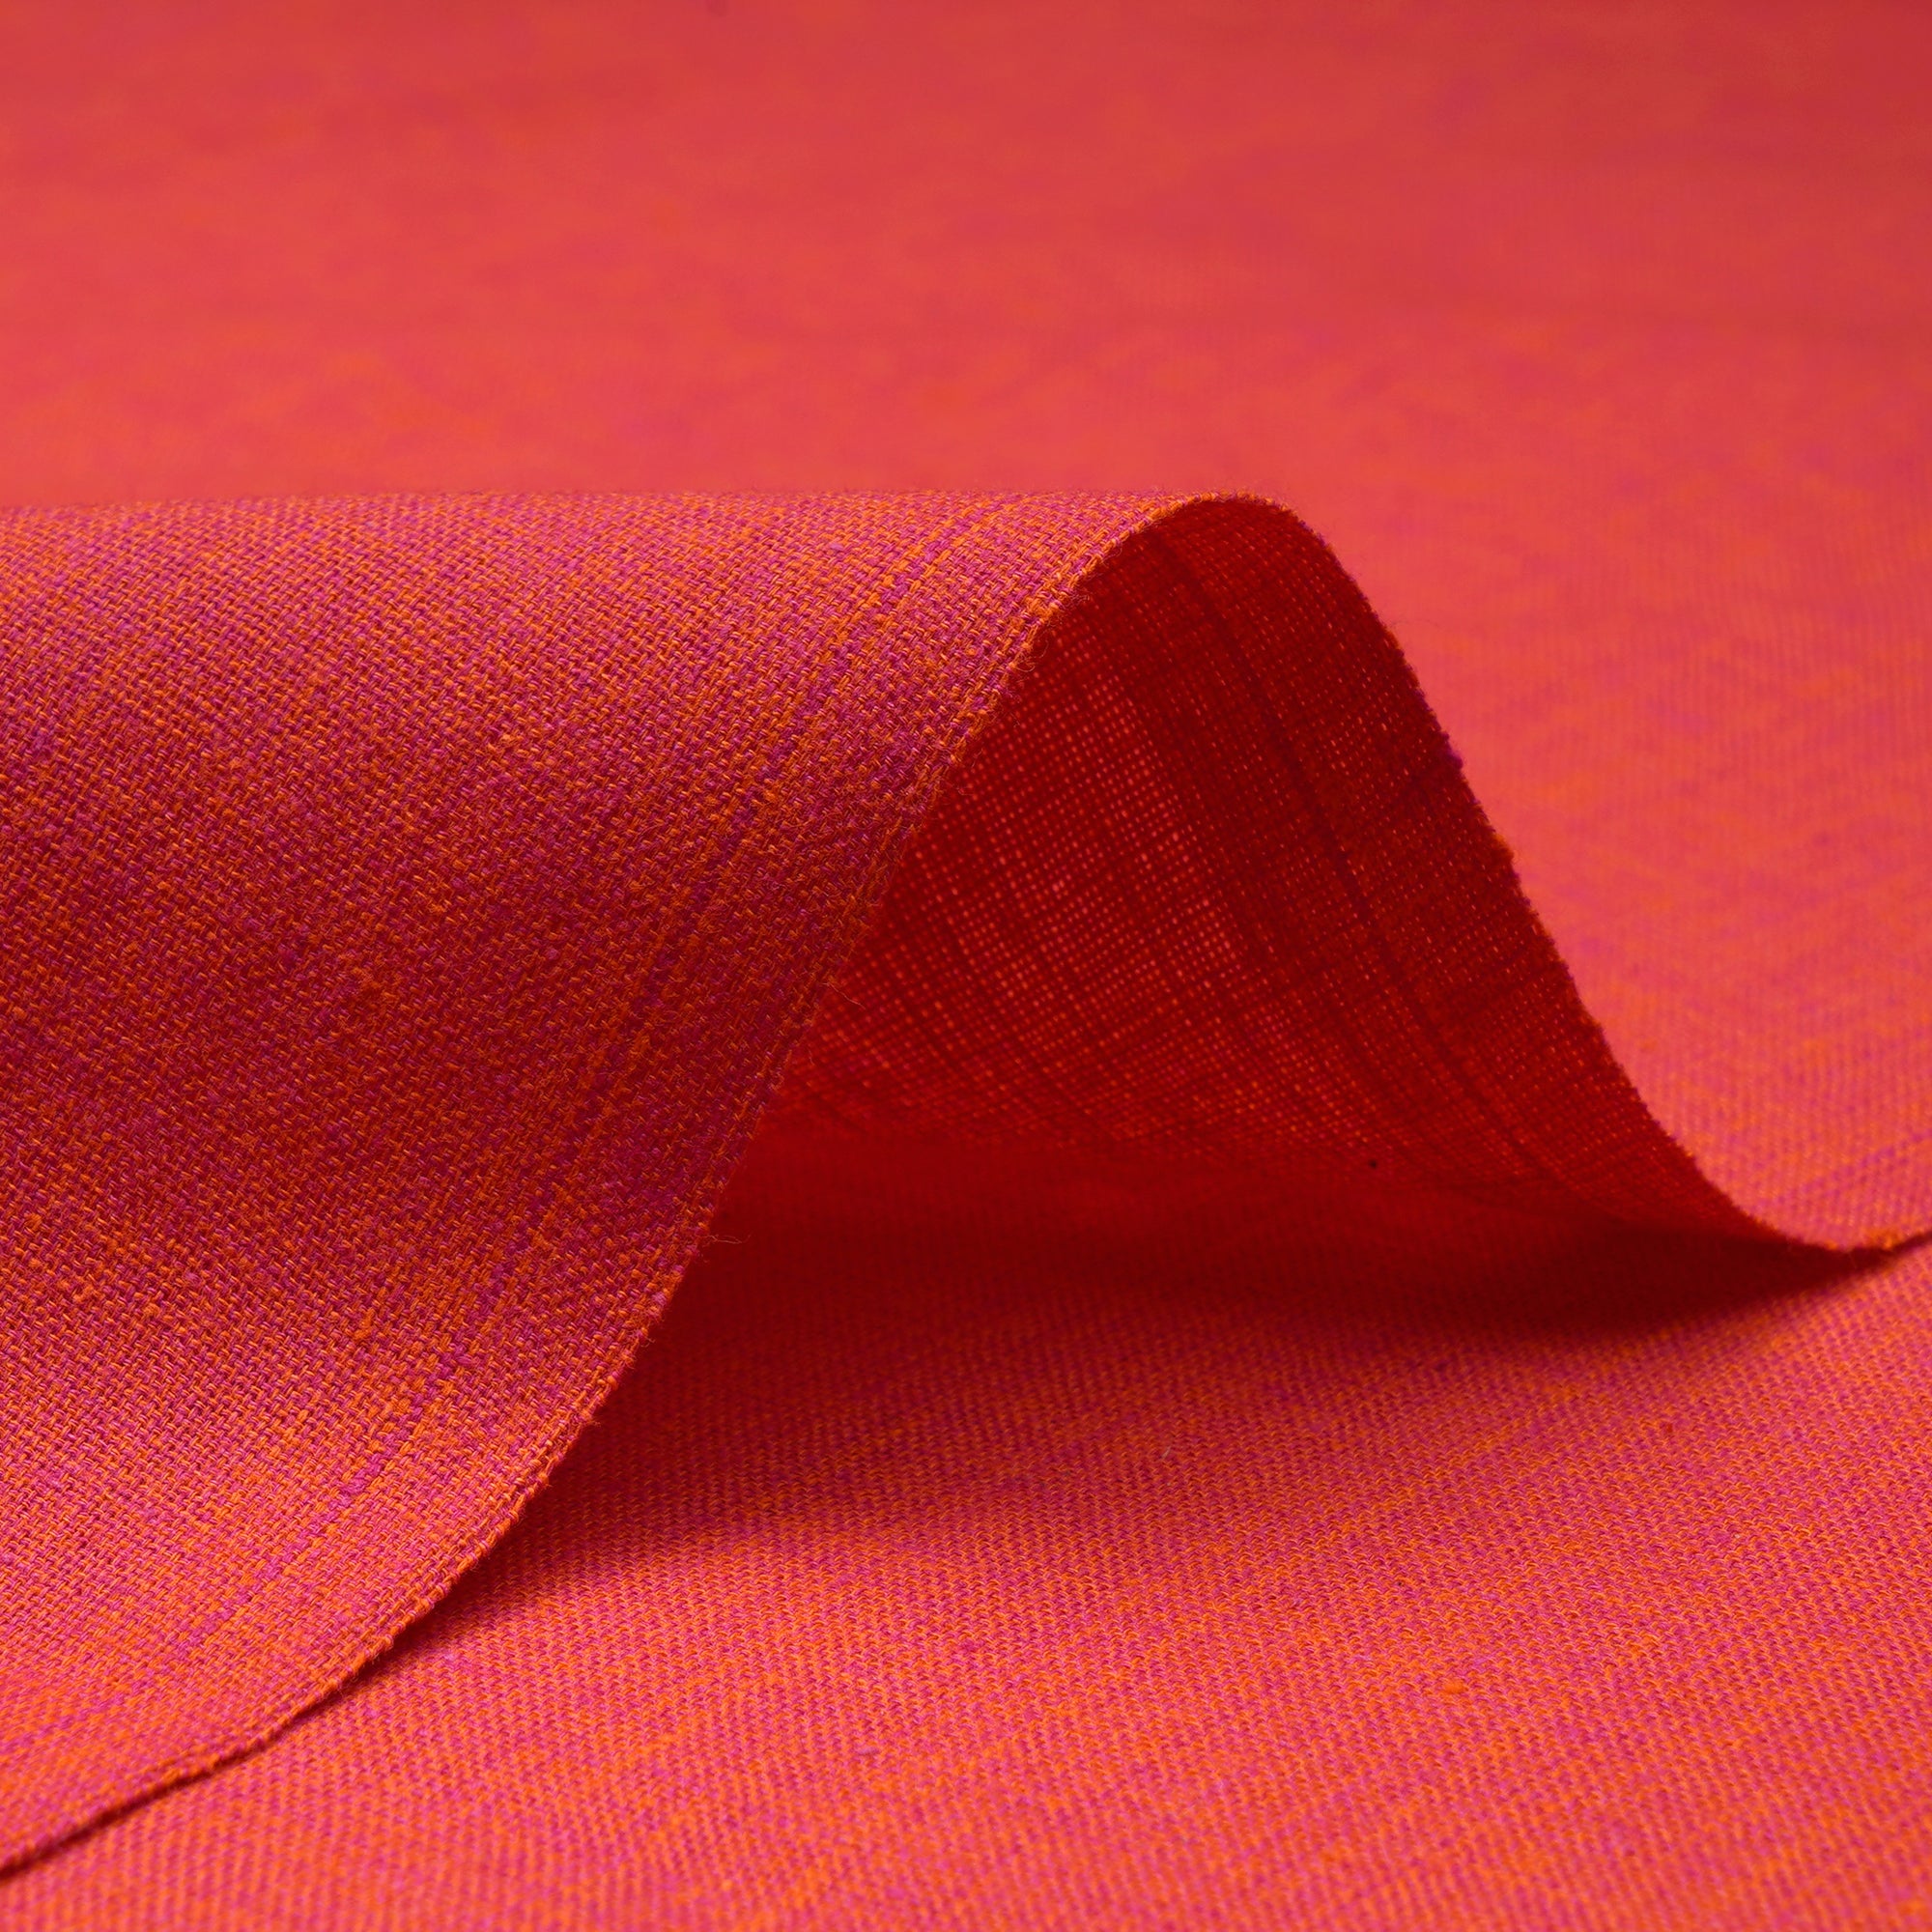 Poppy Red Yarn Dyed Oxford South Cotton Fabric